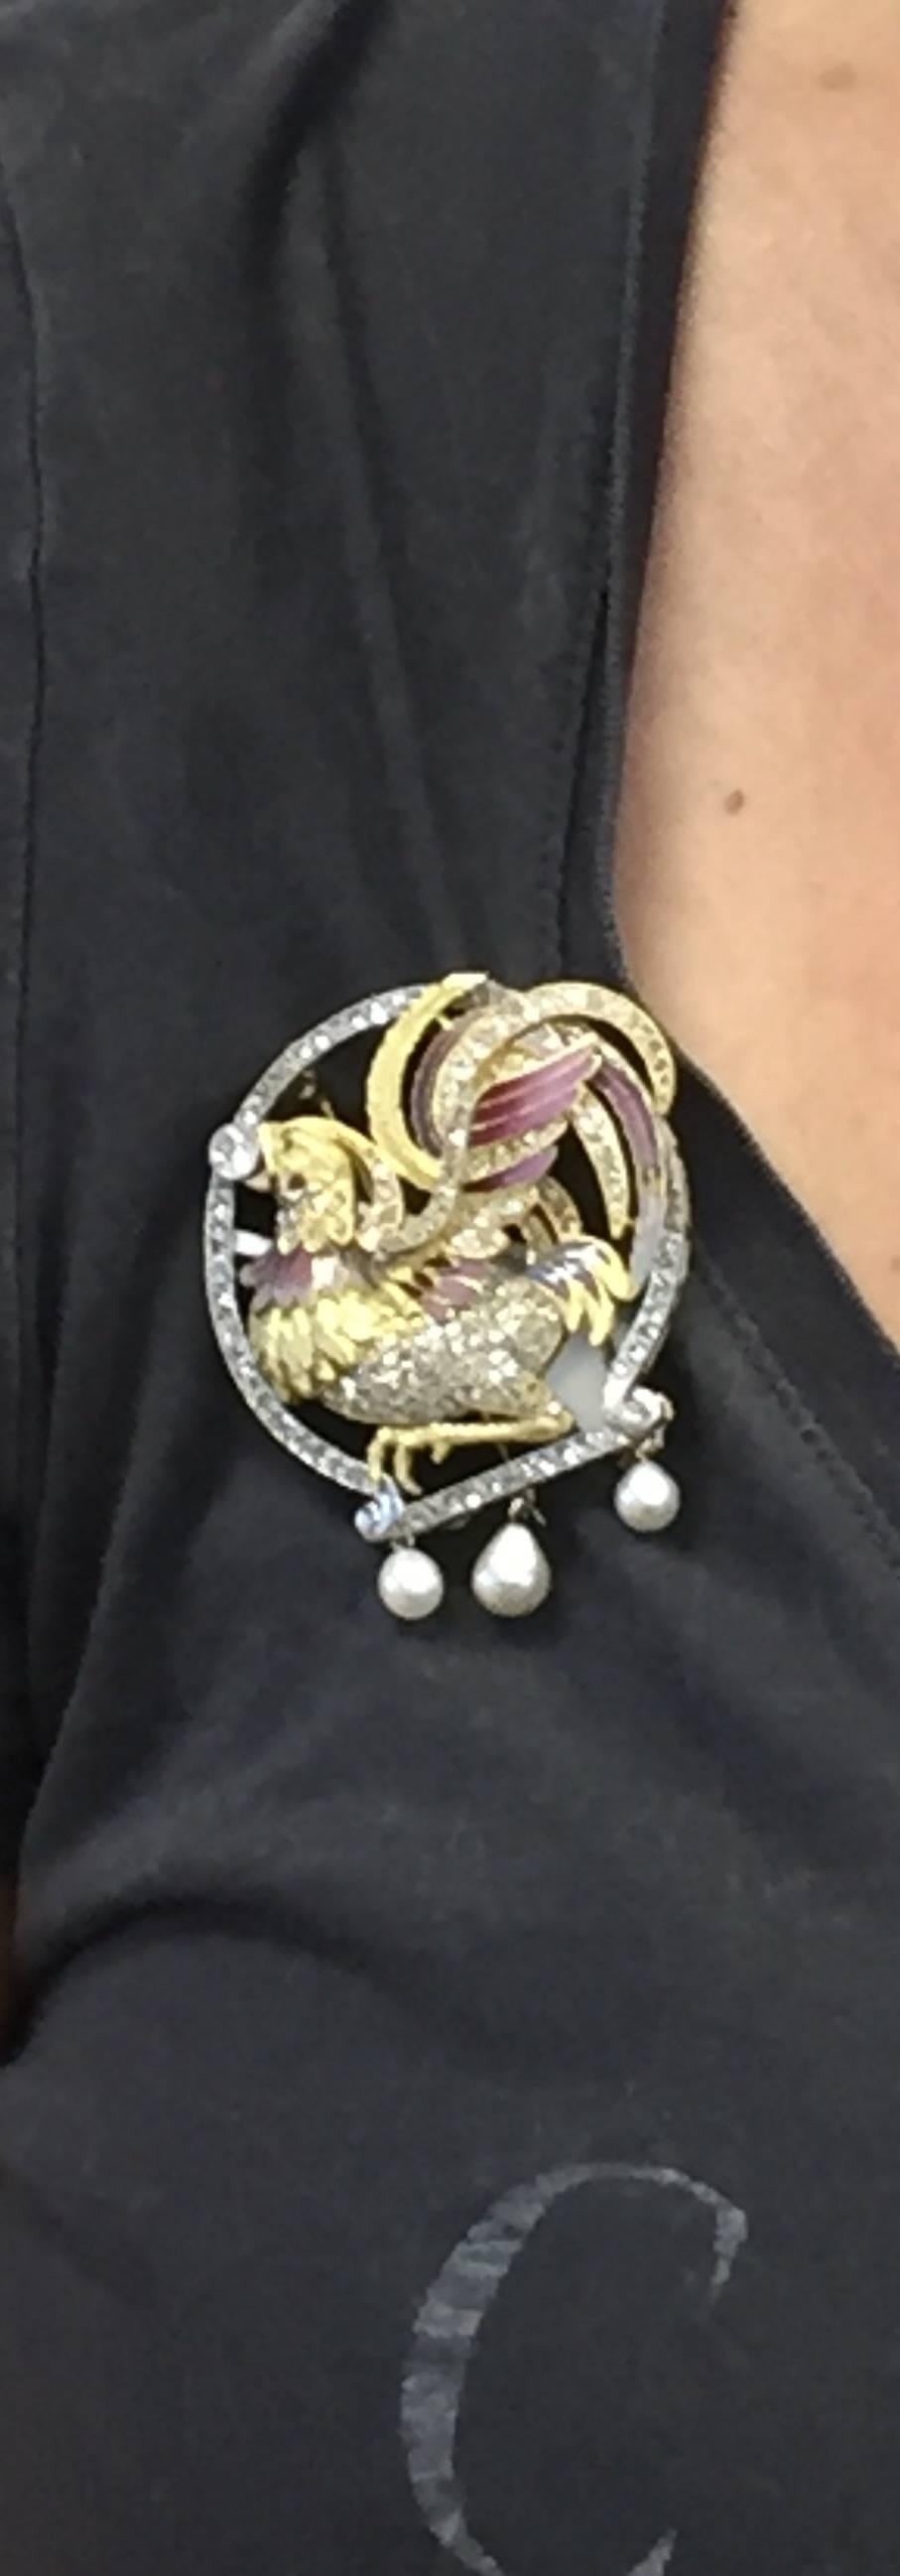 Magnificent Antique Rooster Brooch made of platinum.  Consists approximately 2.50ctw of diamonds, finely done purplish pink enamel, 18k yellow gold, and 3 pearls.  Beautiful look!